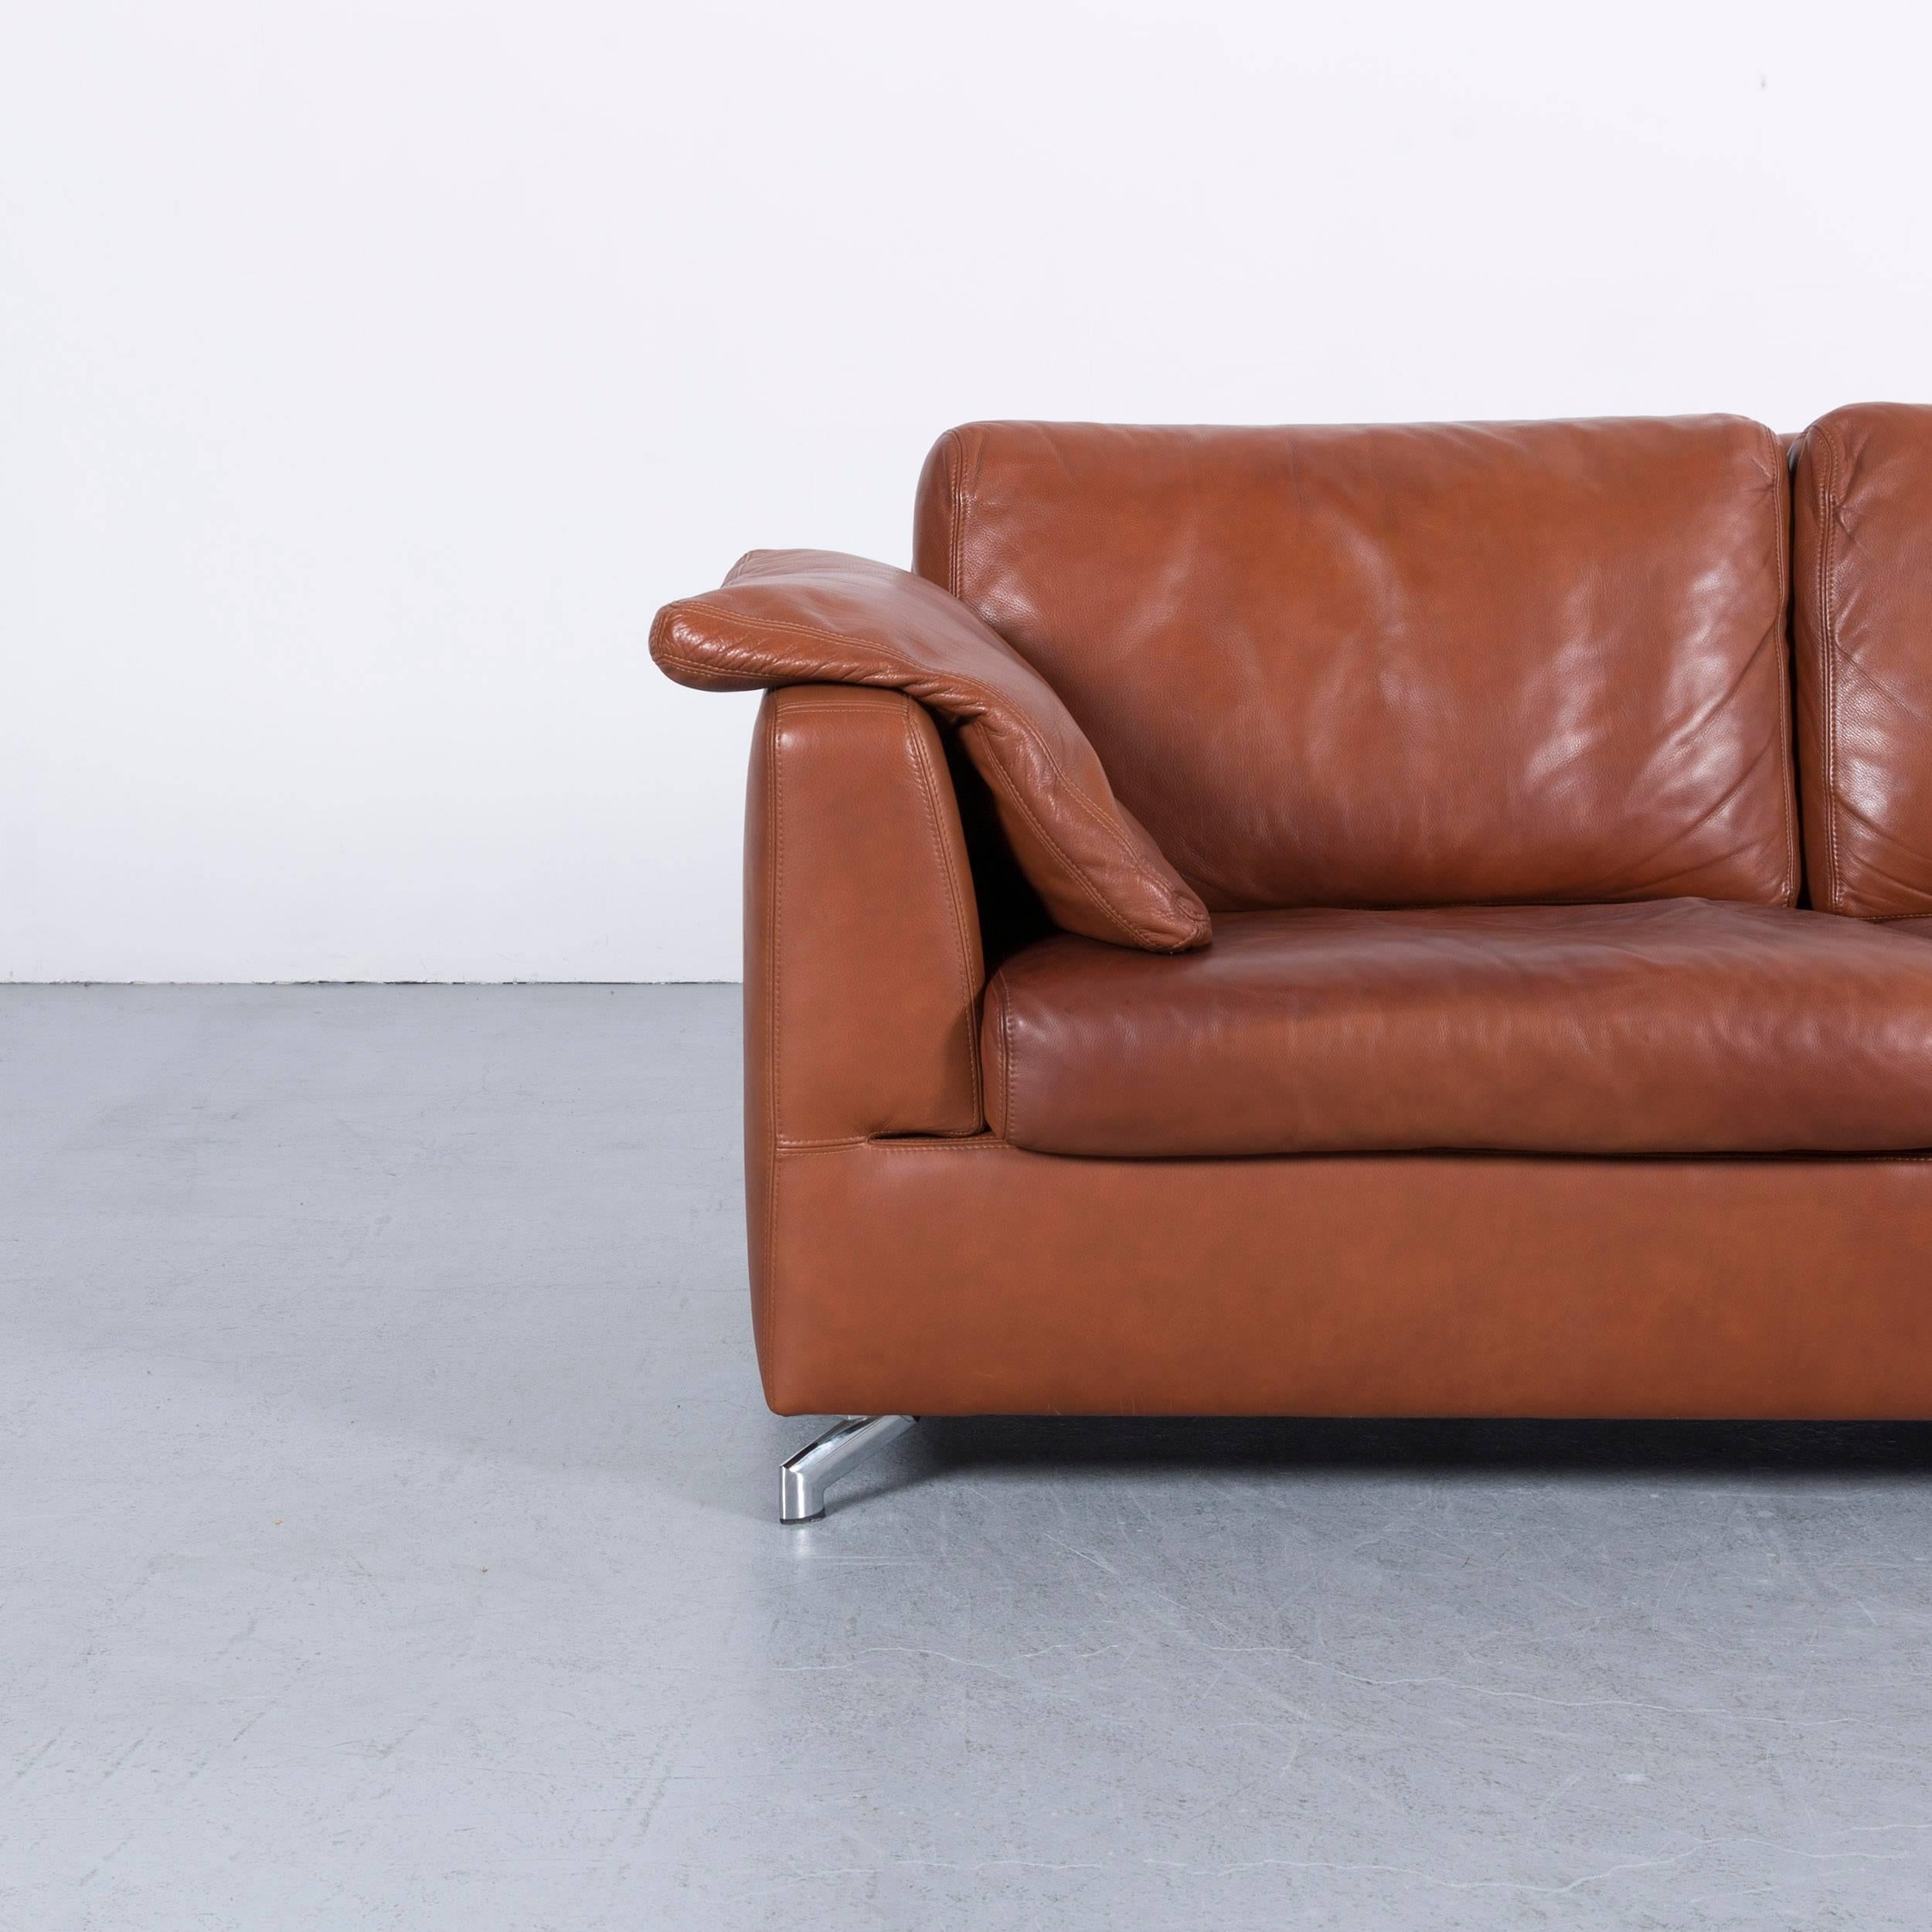 We bring to you an Machalke leather sofa brown two-seat couch.

































